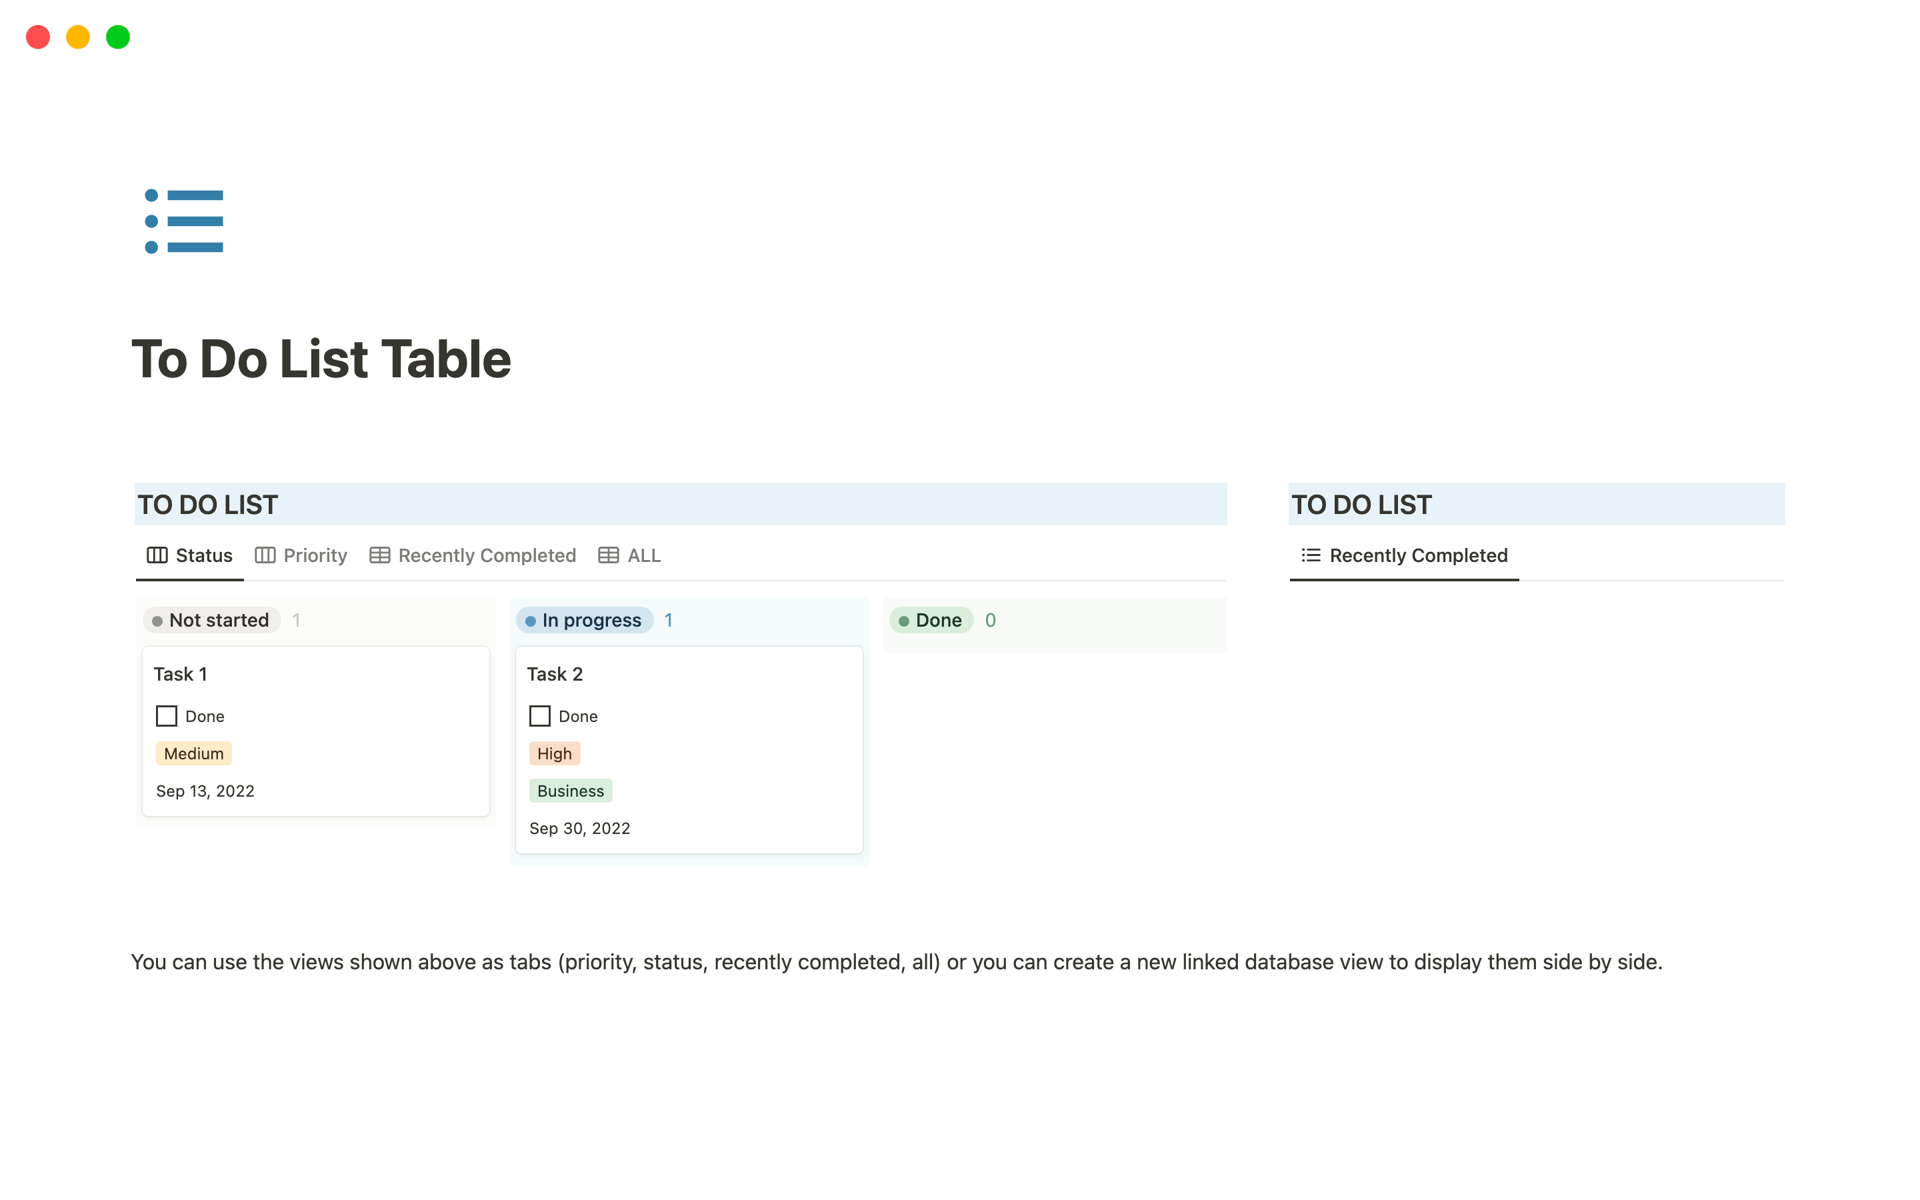 A kanban-style to do list Notion table with a "recently completed" section and a basic Monday-Friday to do list for both personal and business tasks. 